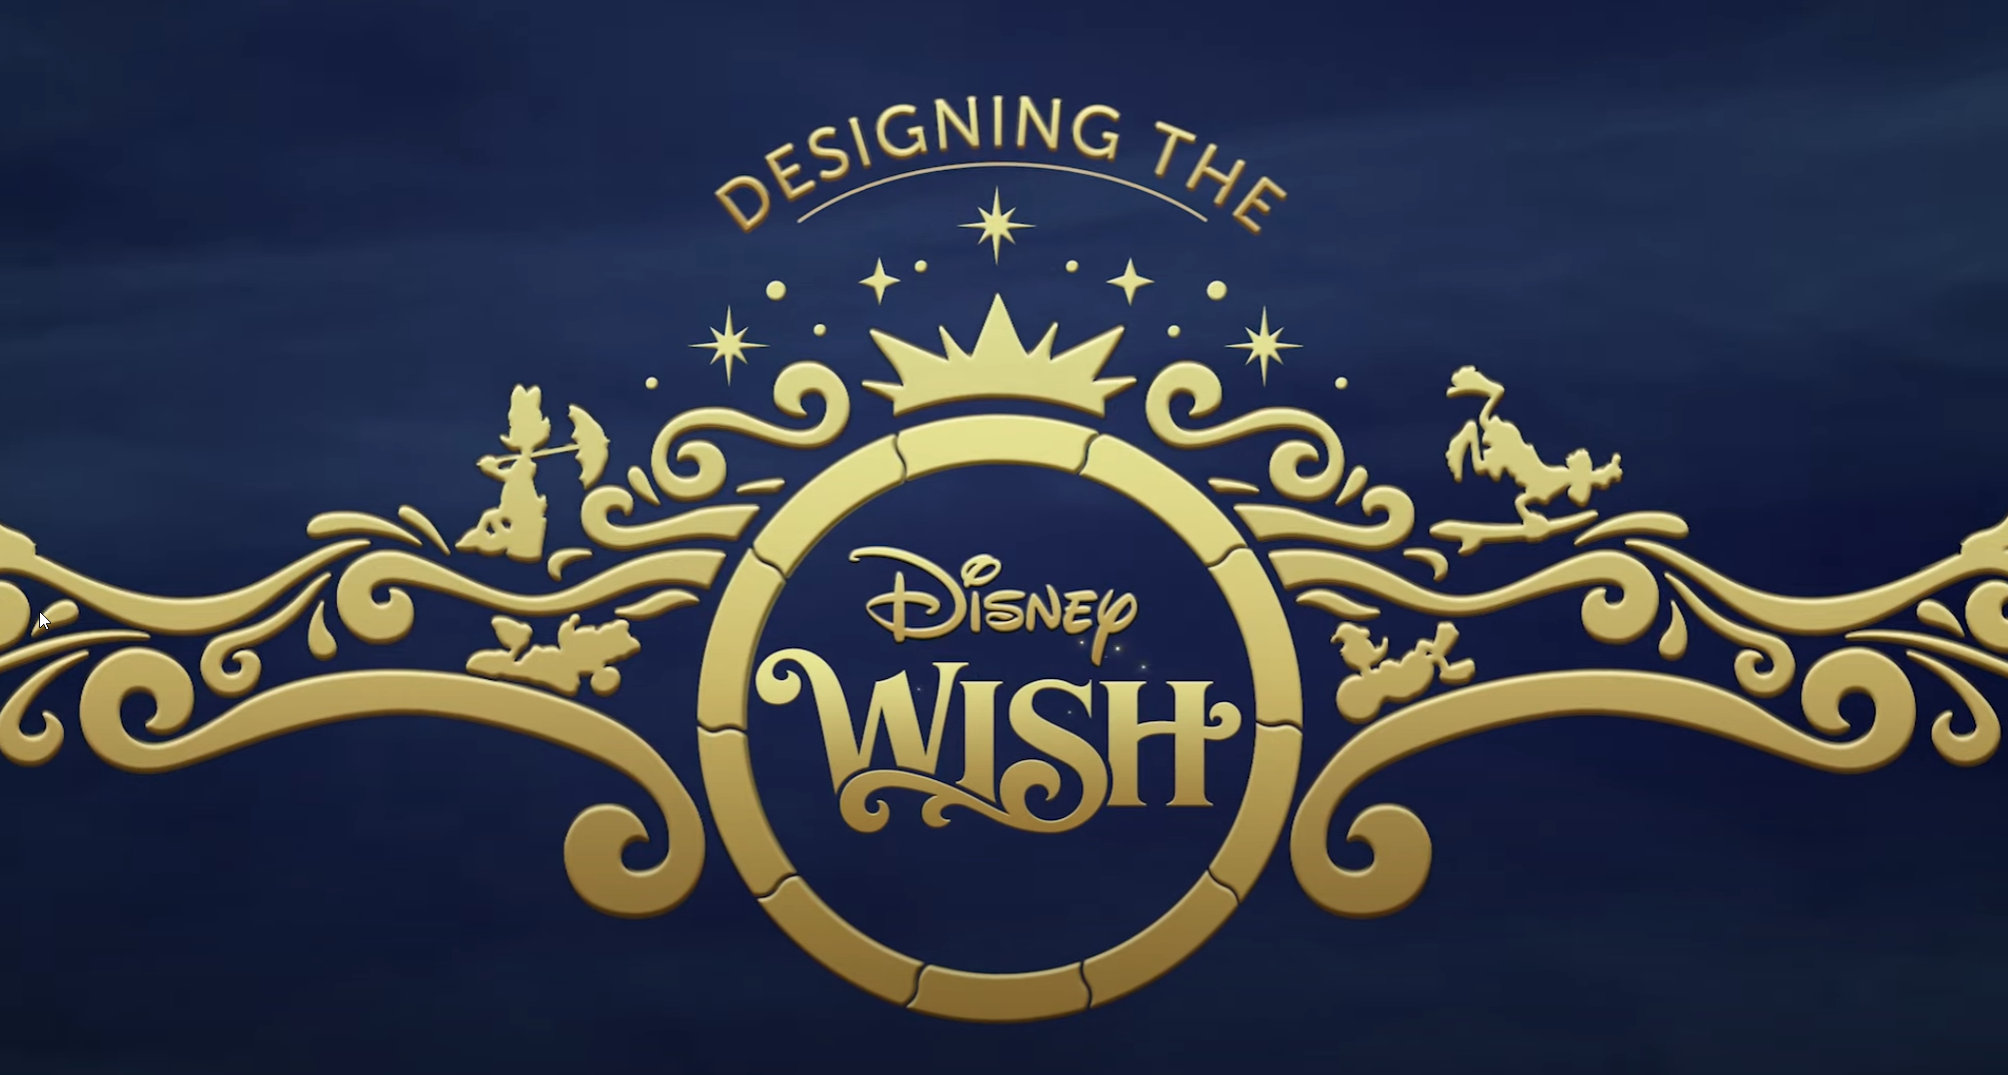 Behind the scenes look at the Disney Wish with more info on the AquaMouse and more!